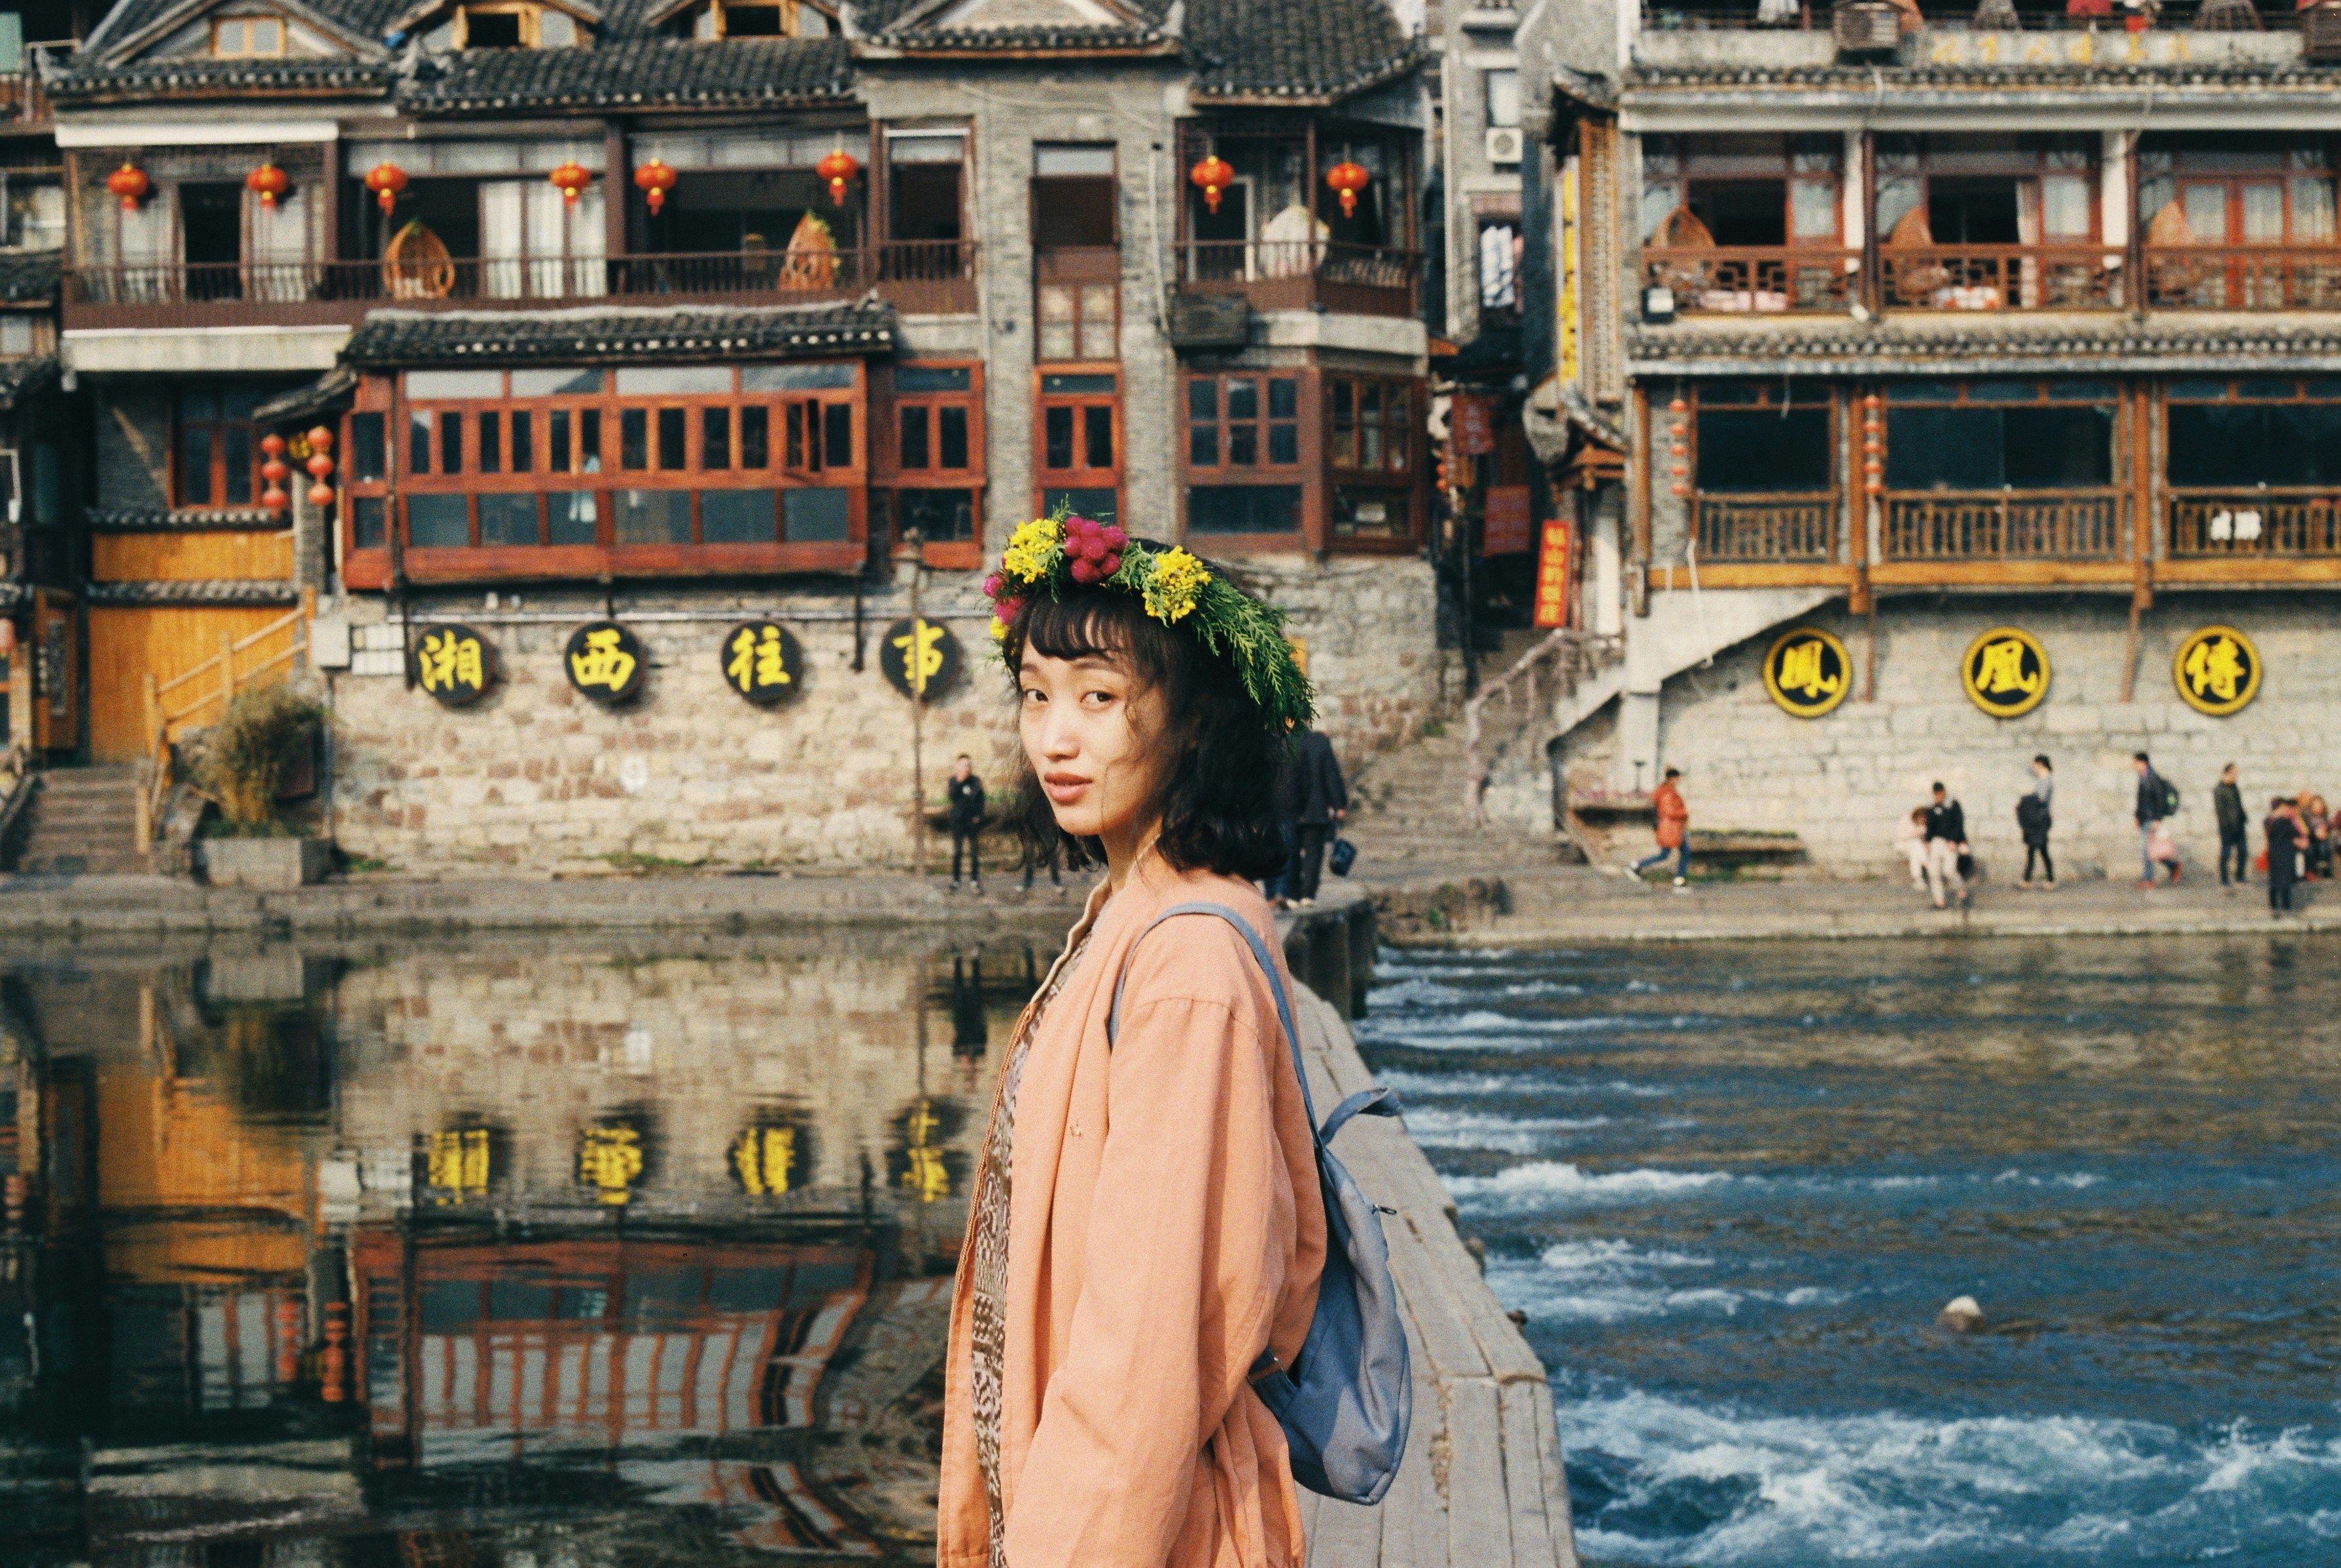 Women lead leisure travel in China, but what’s driving their wanderlust?